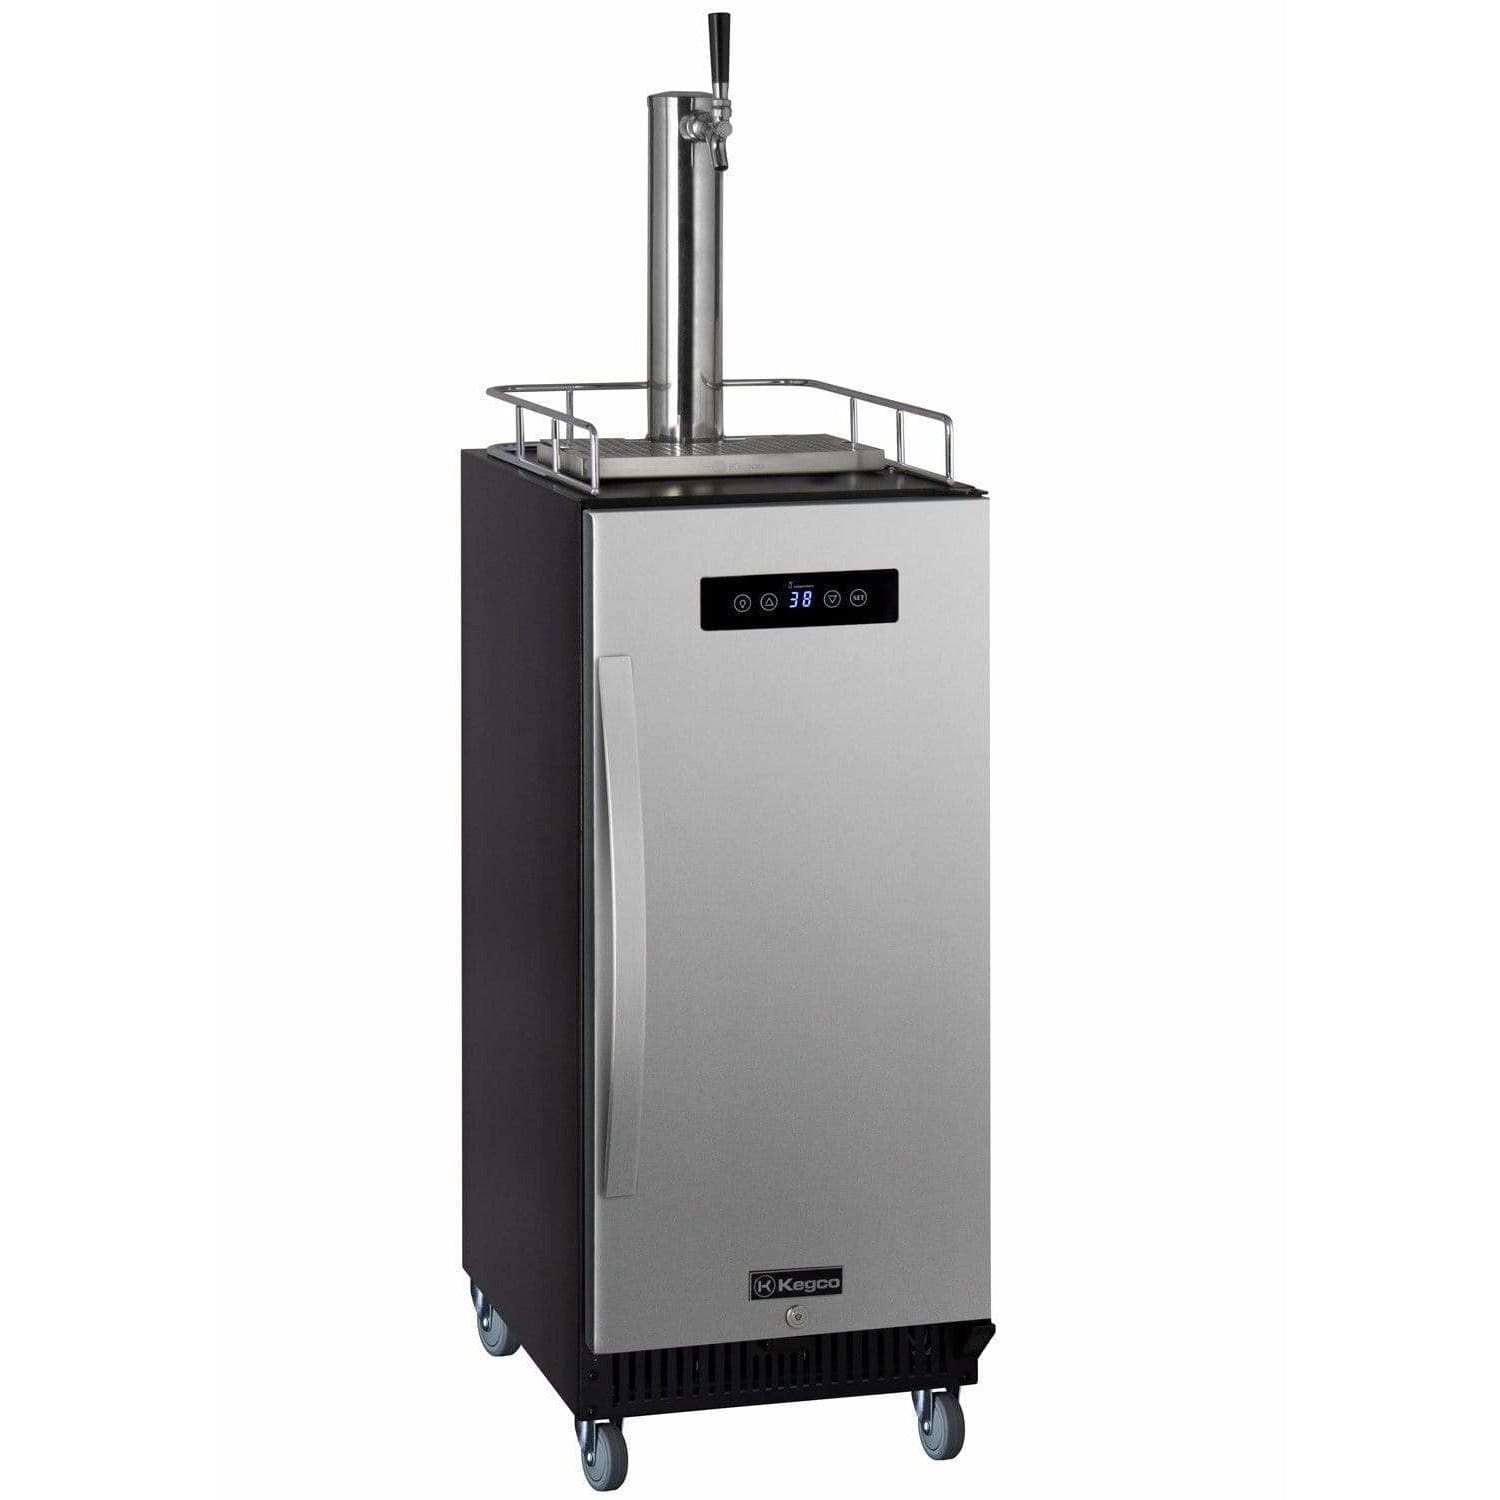 https://winecoolersempire.com/cdn/shop/products/kegco-15-wide-cold-brew-coffee-single-tap-stainless-steel-kegerator-ics15bsr-wine-coolers-empire-36685263929564_1500x1500.jpg?v=1645647178